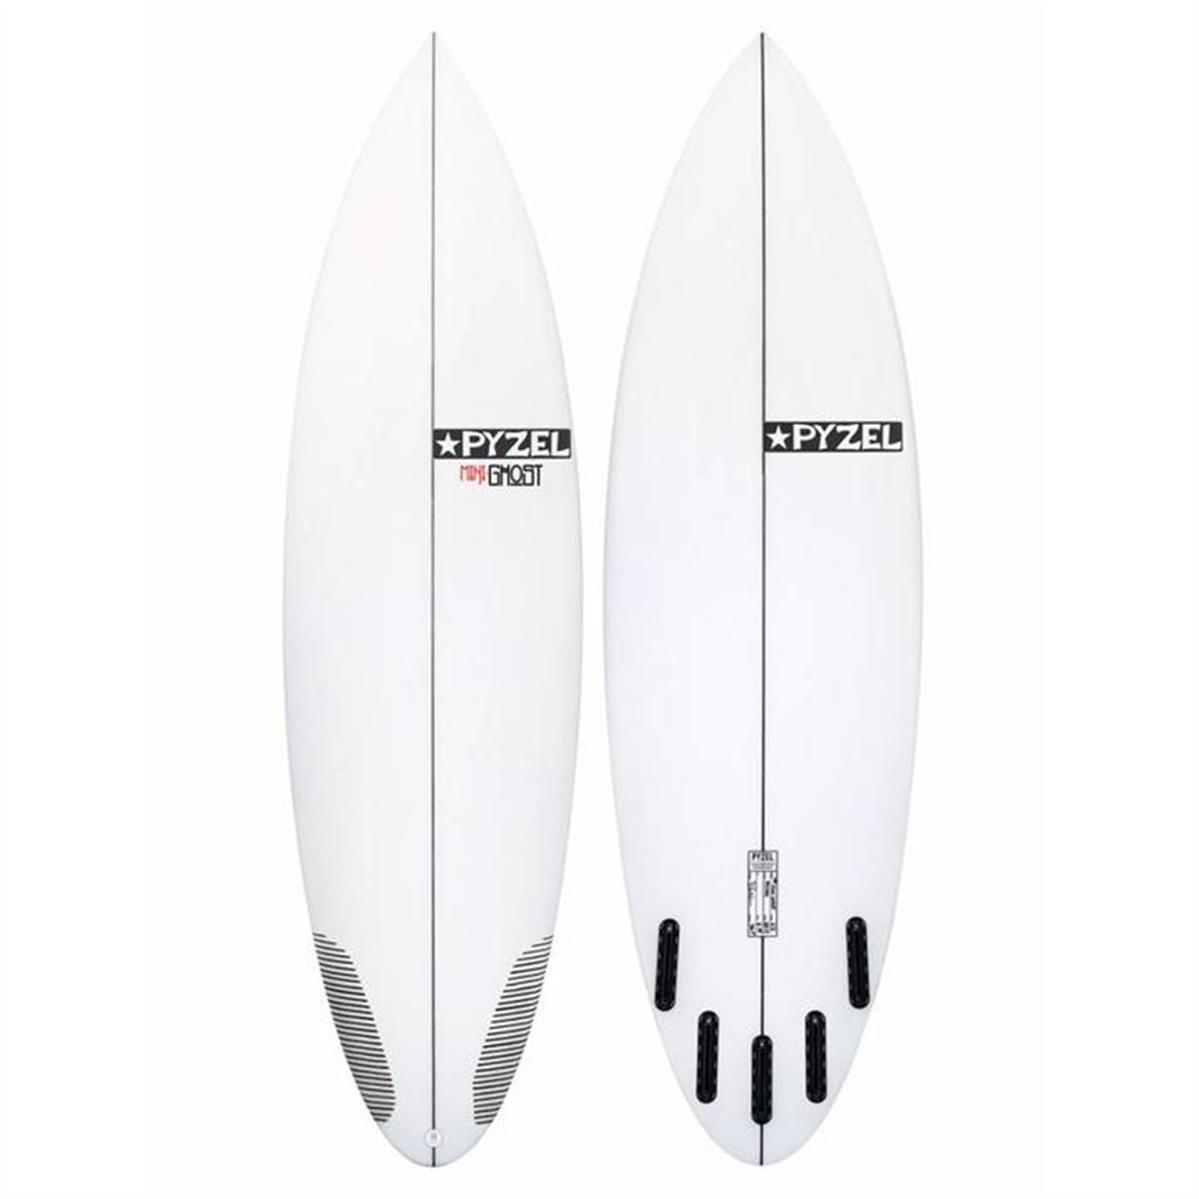 Pyzel Mini Ghost Round Tail Surfboard With 5 Future Fin Boxes